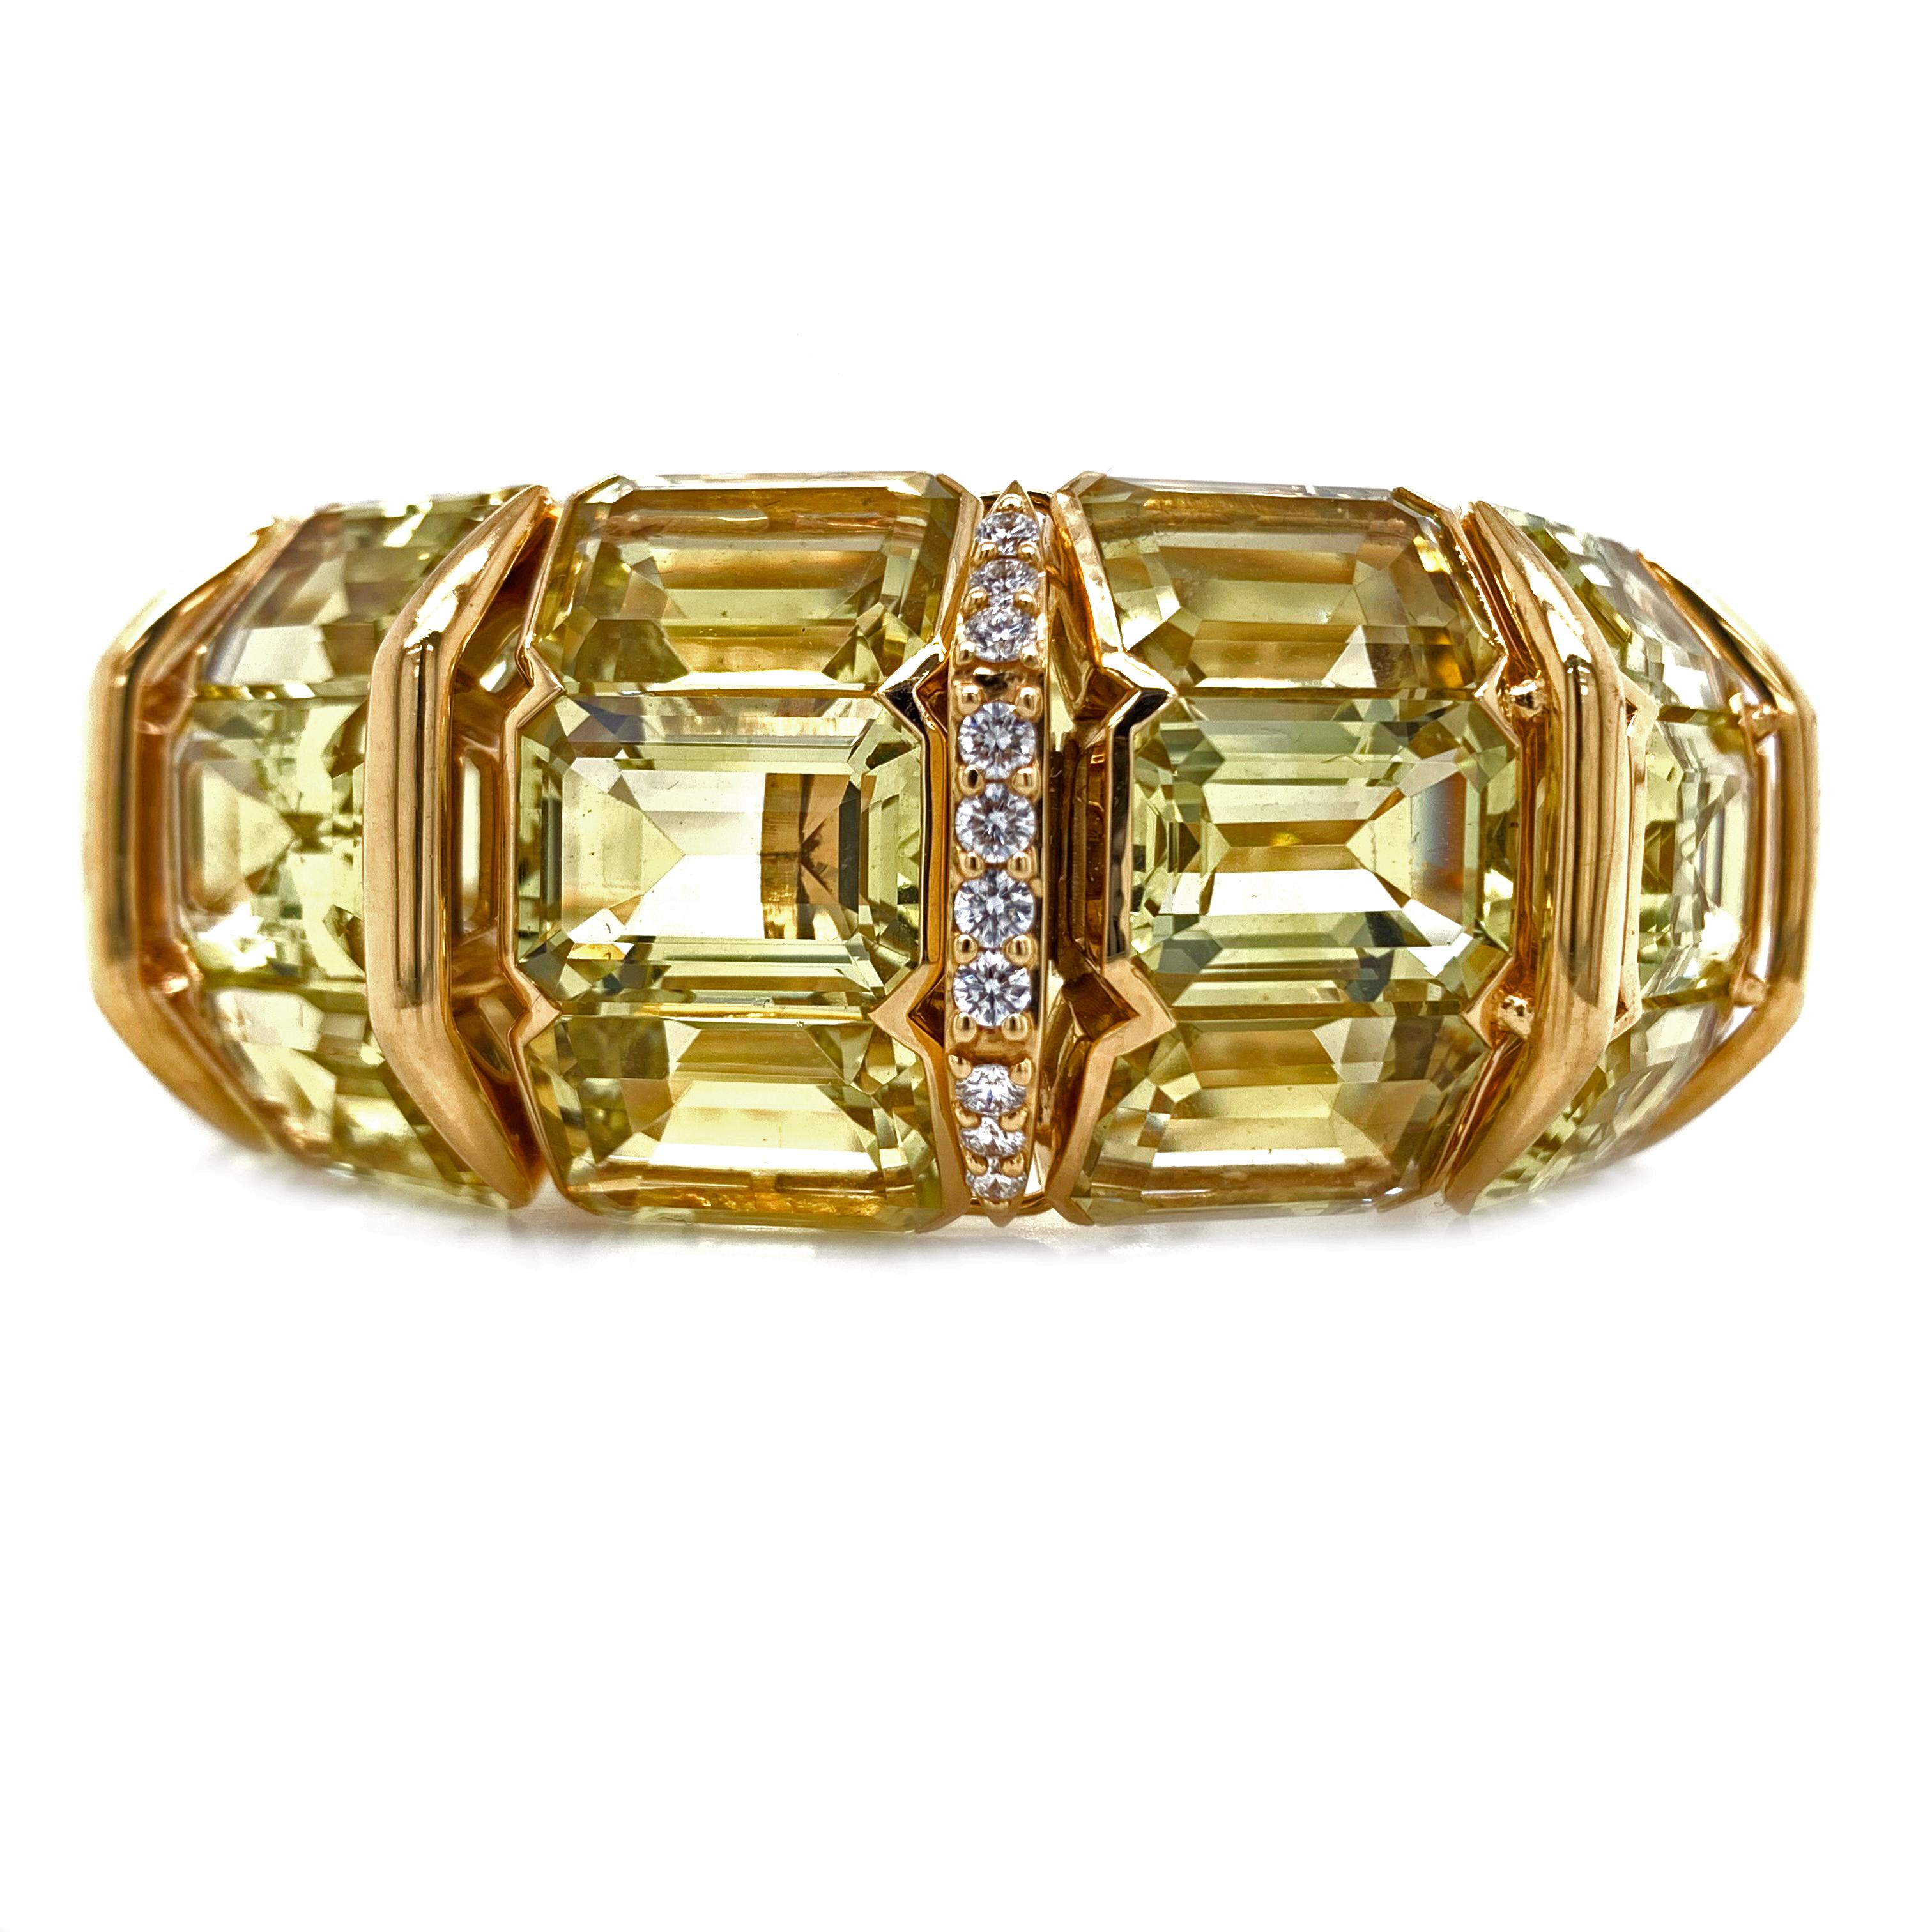 A beautiful 18k yellow gold Lemon Quartz and Diamond bangle.  Crafted in 18k yellow gold this beautiful 255.93cts Lemon Quartz bracelet has an inner diameter of  6.5in and outer diameter of 9.6in and weighs 116.8grams. Beatifully crafted in